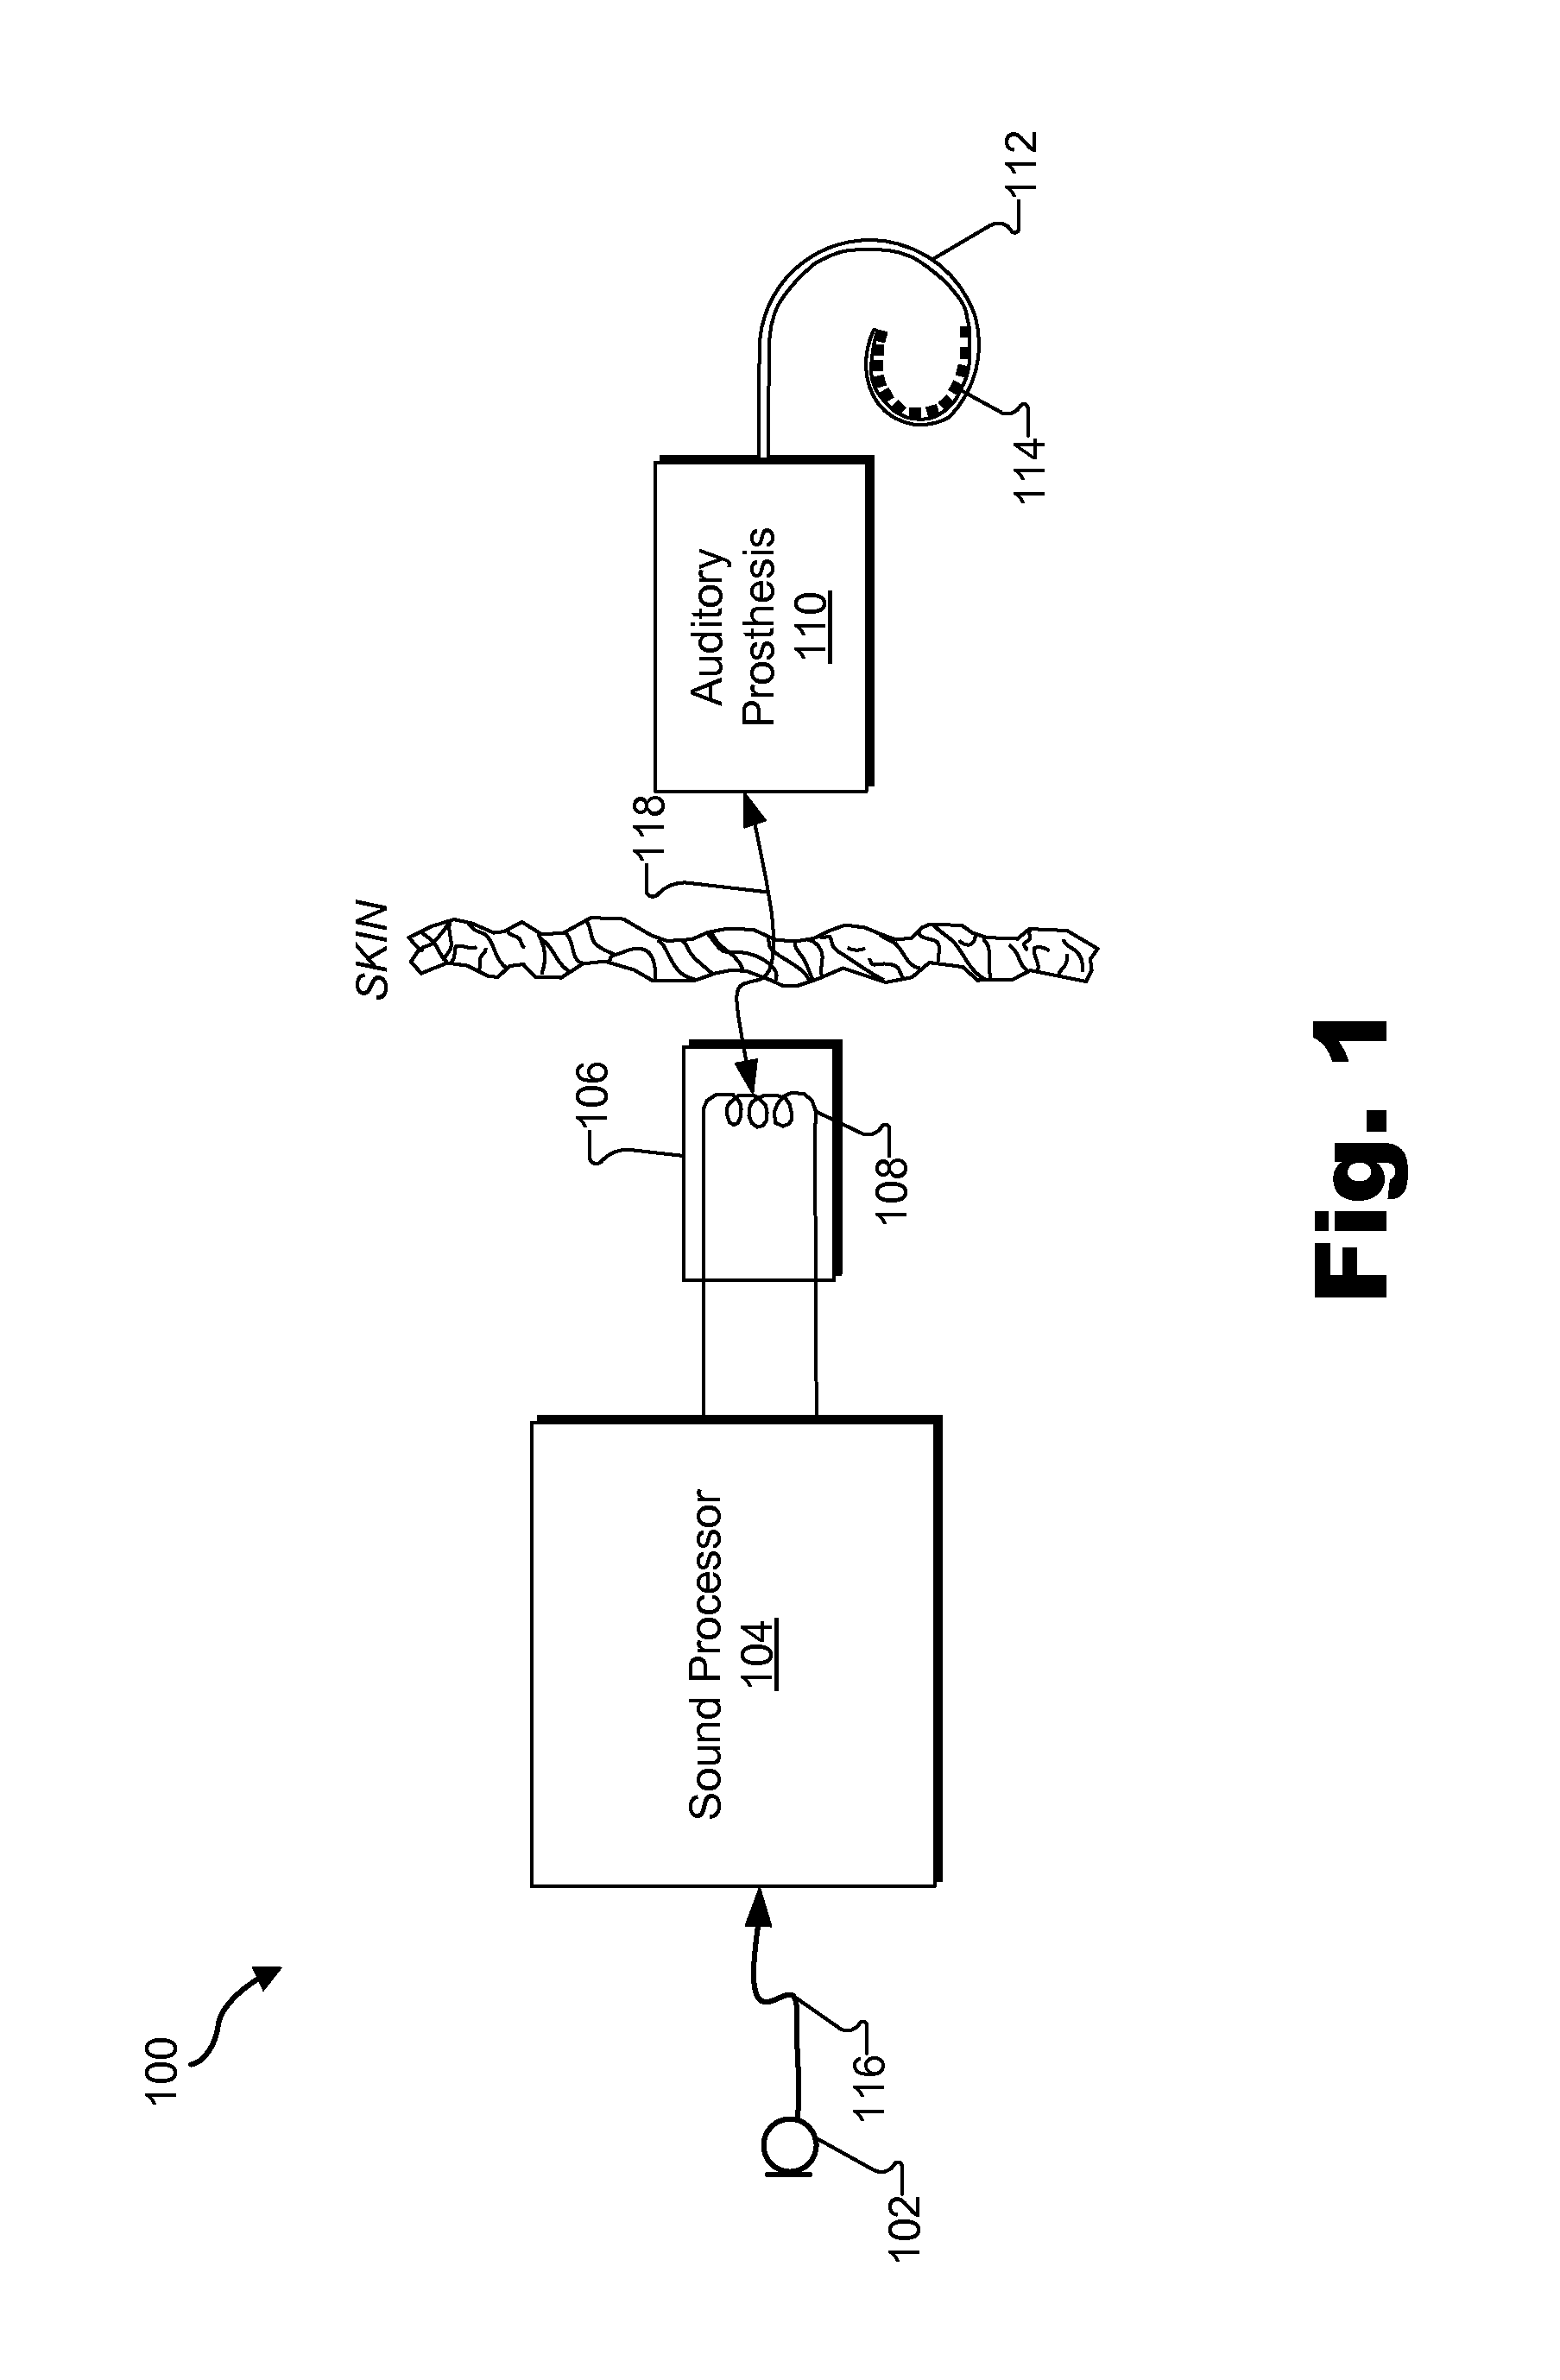 Systems and methods for improving representation by an auditory prosthesis system of audio signals having intermediate sound levels